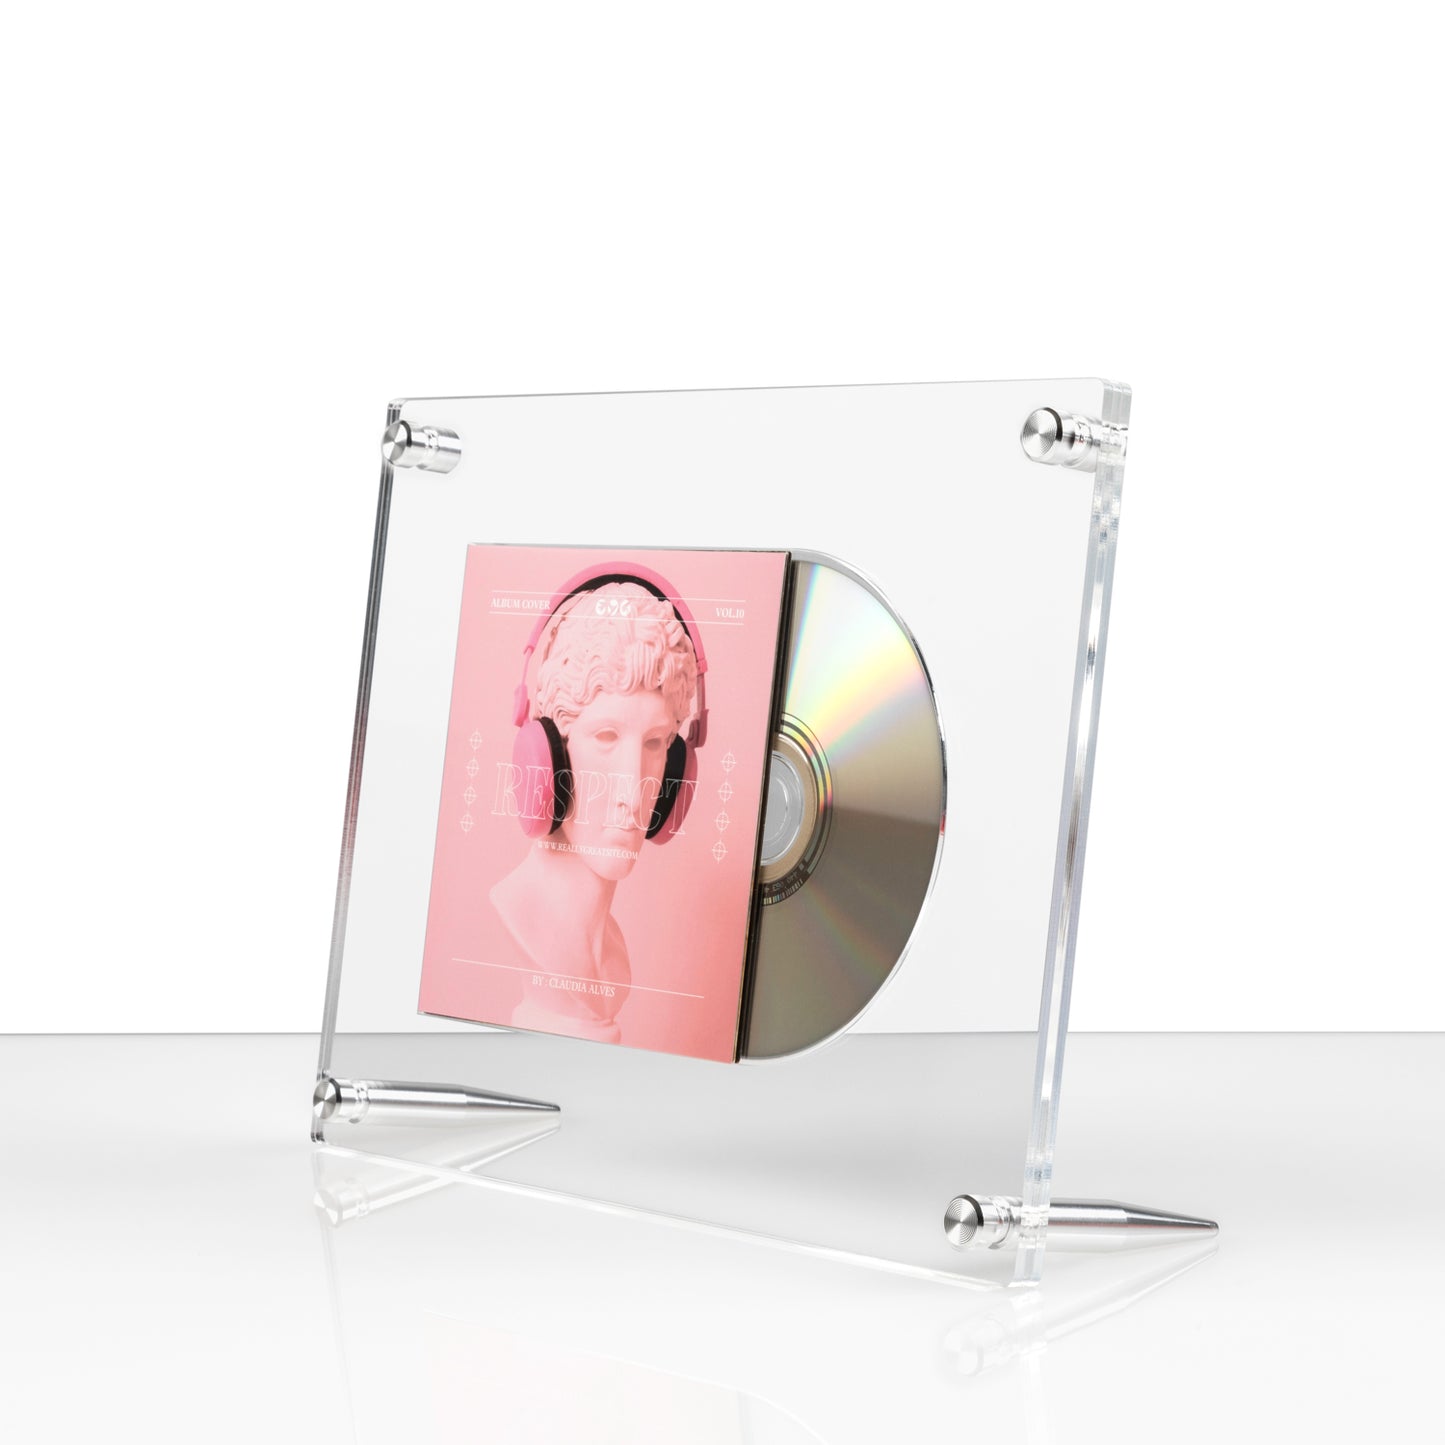 Tabletop CD Frame for the Music Lover in Your Life